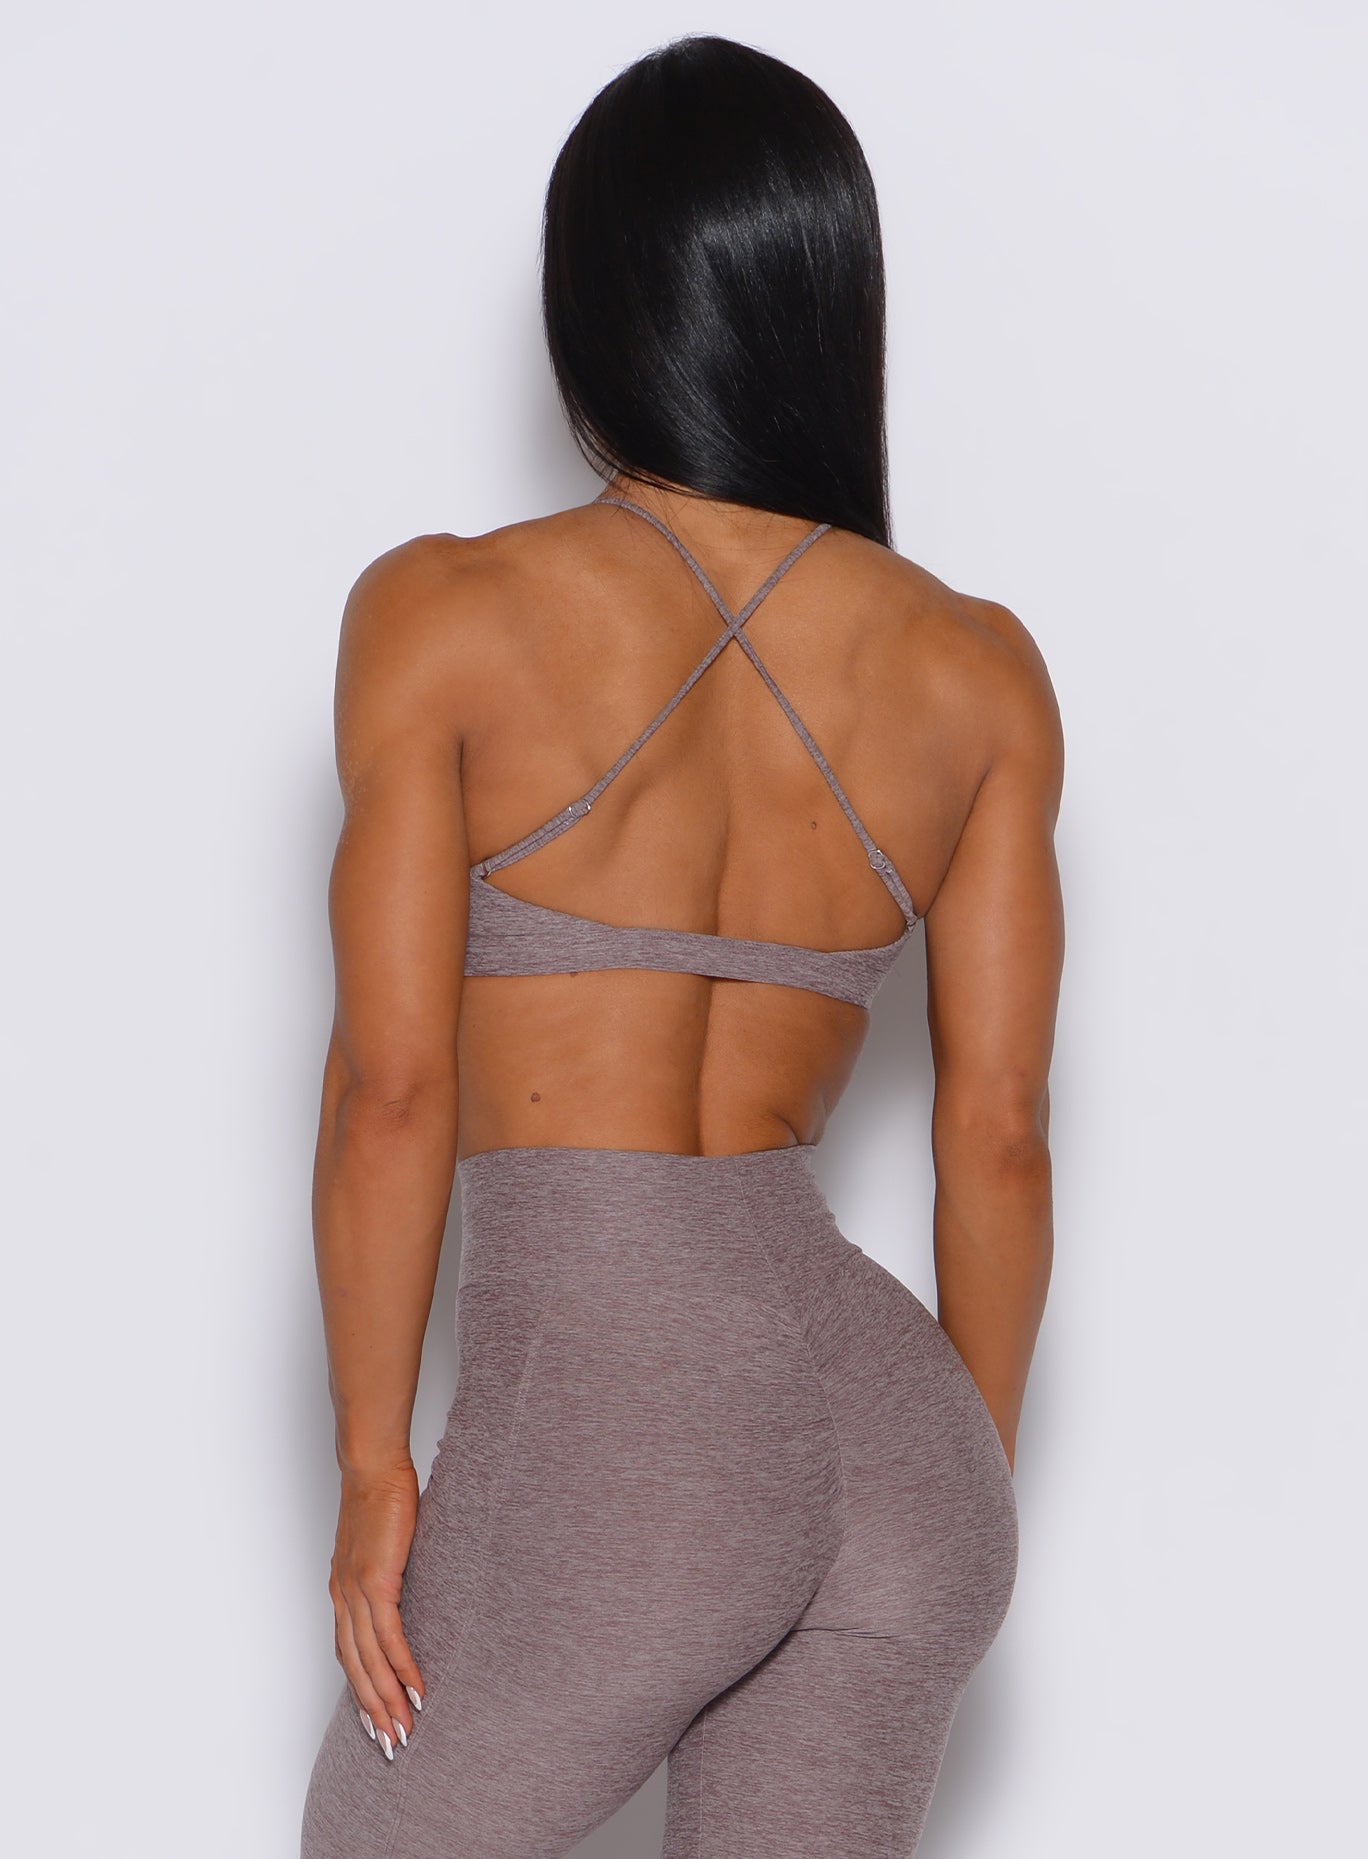 back profile picture of a model wearing our Tiny Twist bra in London Fog color along with the matching leggings.